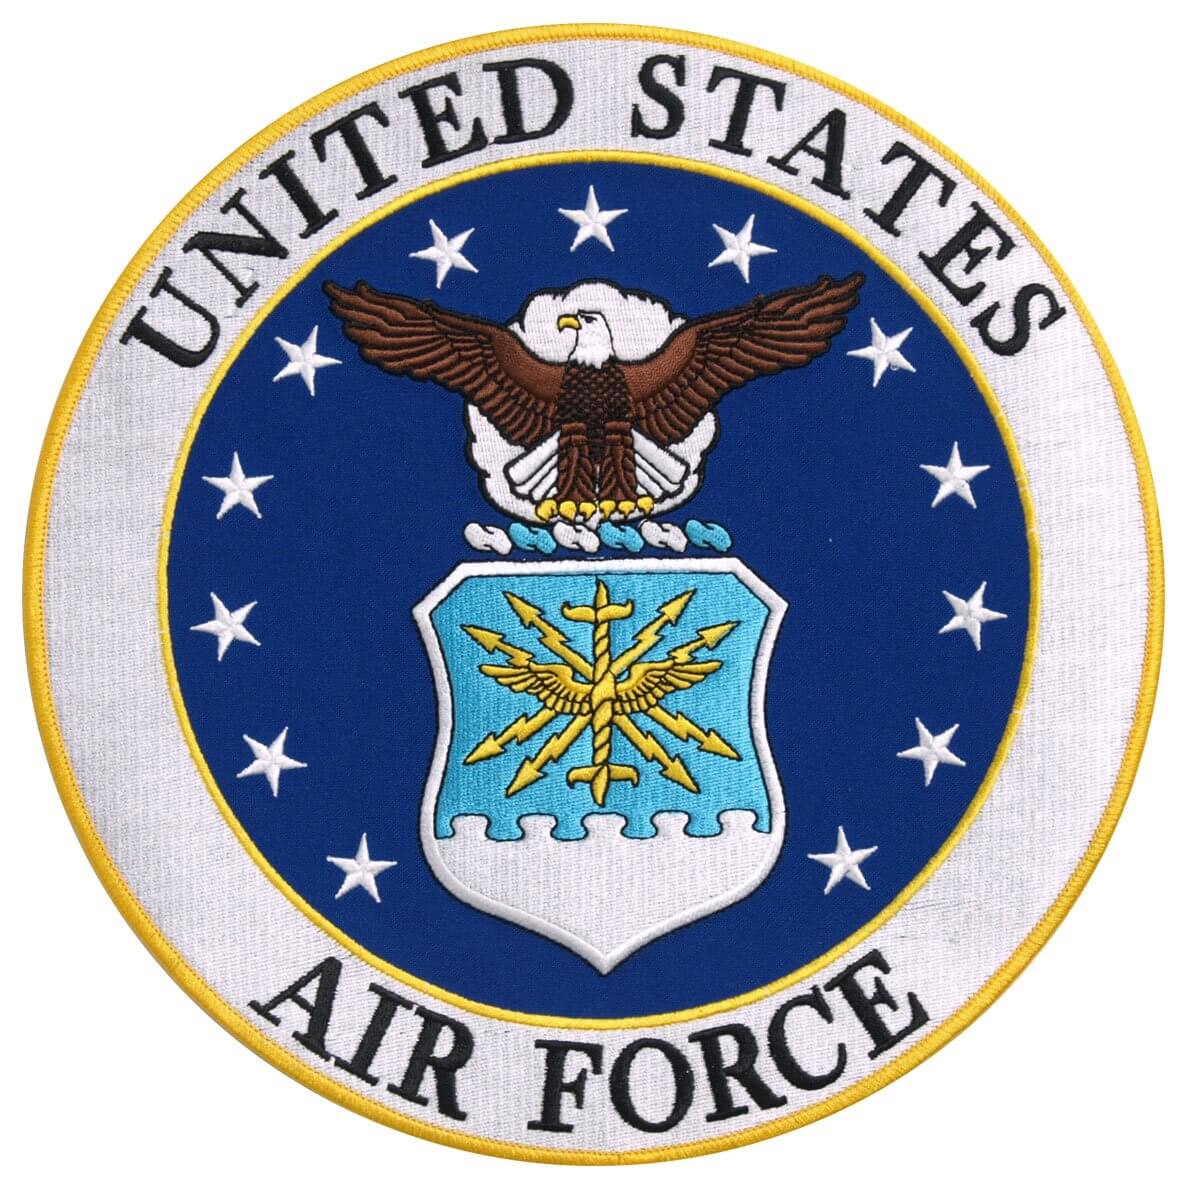 This was standardized by Truman, who wanted the eagle to face the direction signifying honor and nobility (and also facing the olive branches of peace rather than the arrows of war).